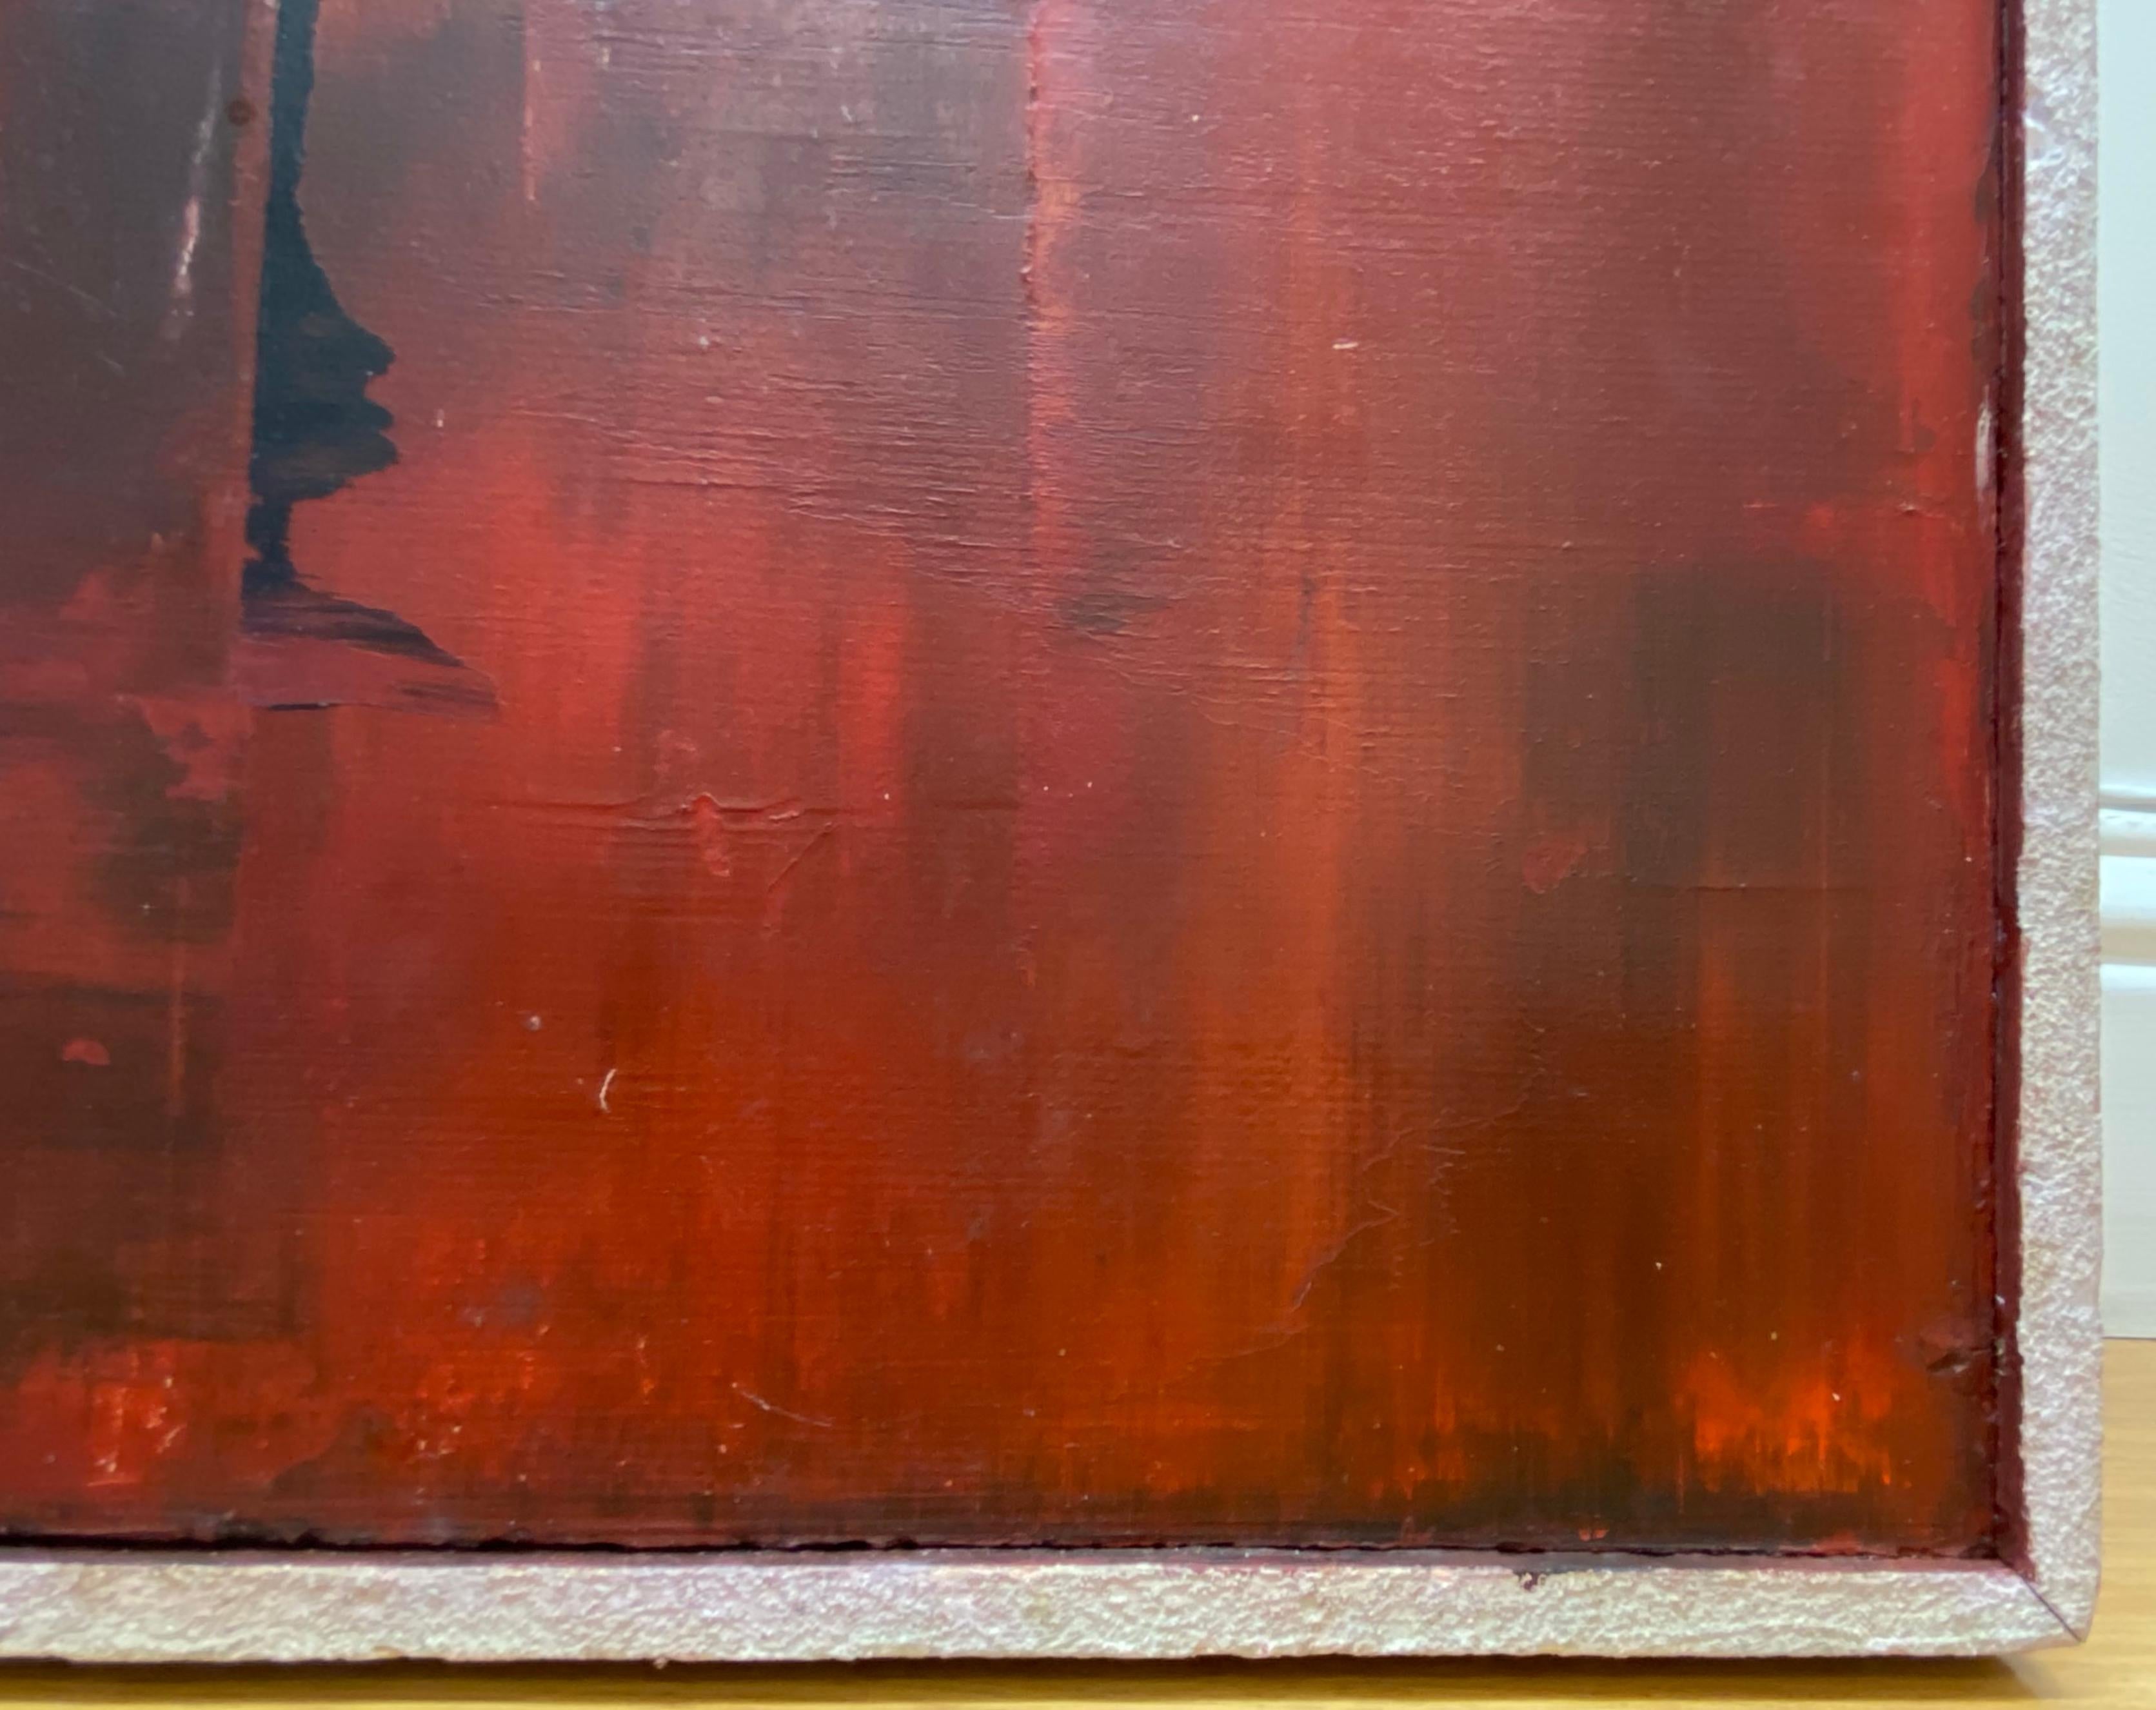 Les Lambson Vintage Abstract Red Landscape Original Painting C.1970

Large scale abstract oil painting

Original oil on masonite

Dimensions 20